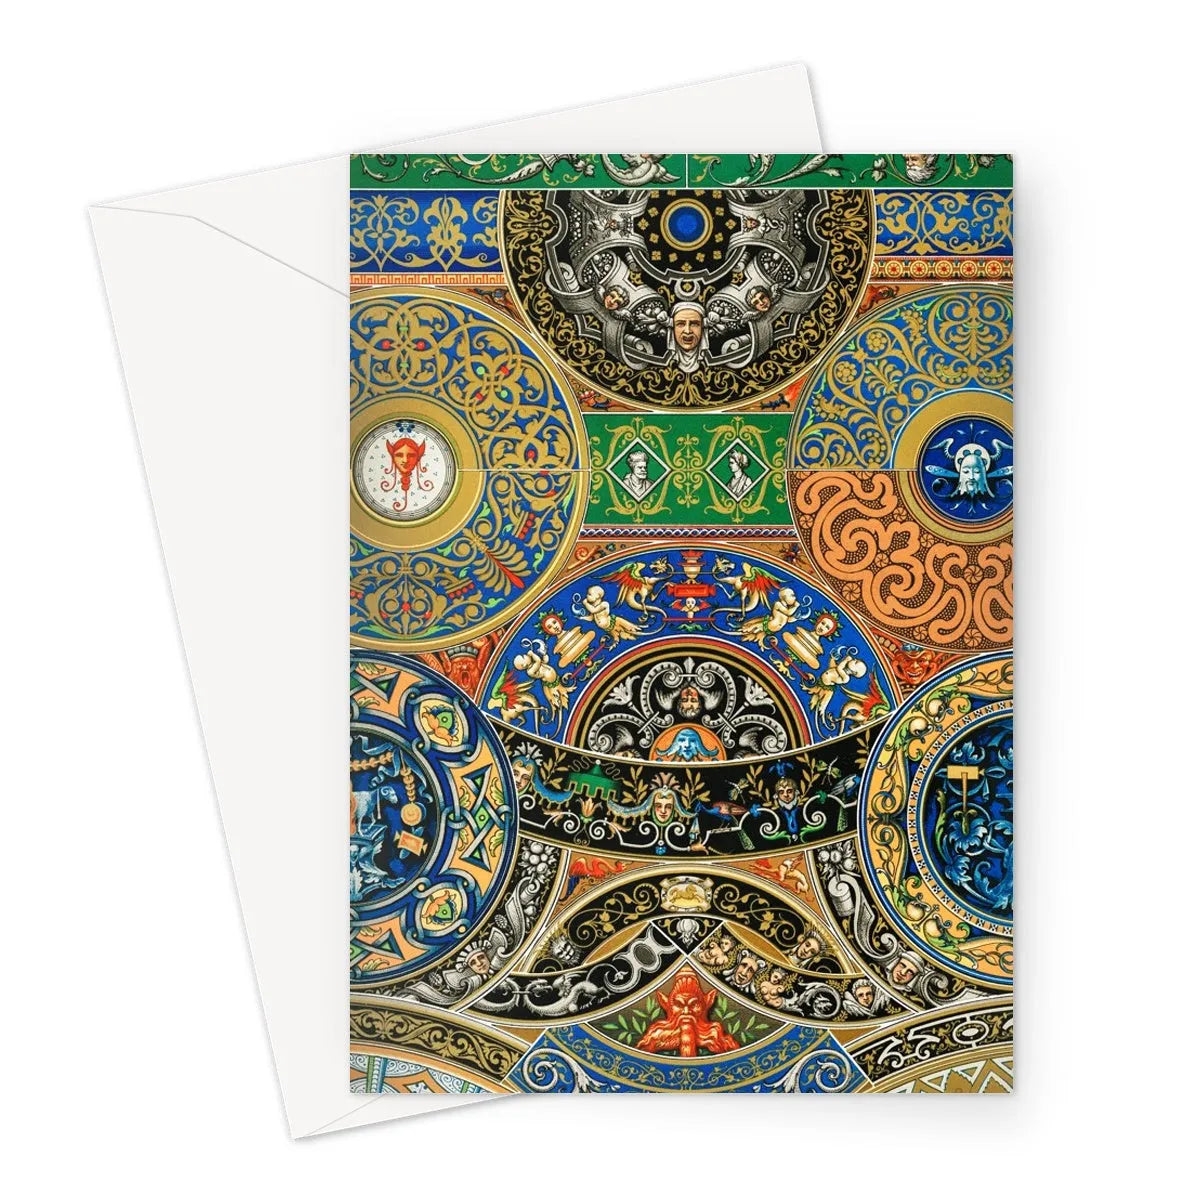 Renaissance Pattern 2 By Auguste Racinet Greeting Card - A5 Portrait / 1 Card - Notebooks & Notepads - Aesthetic Art